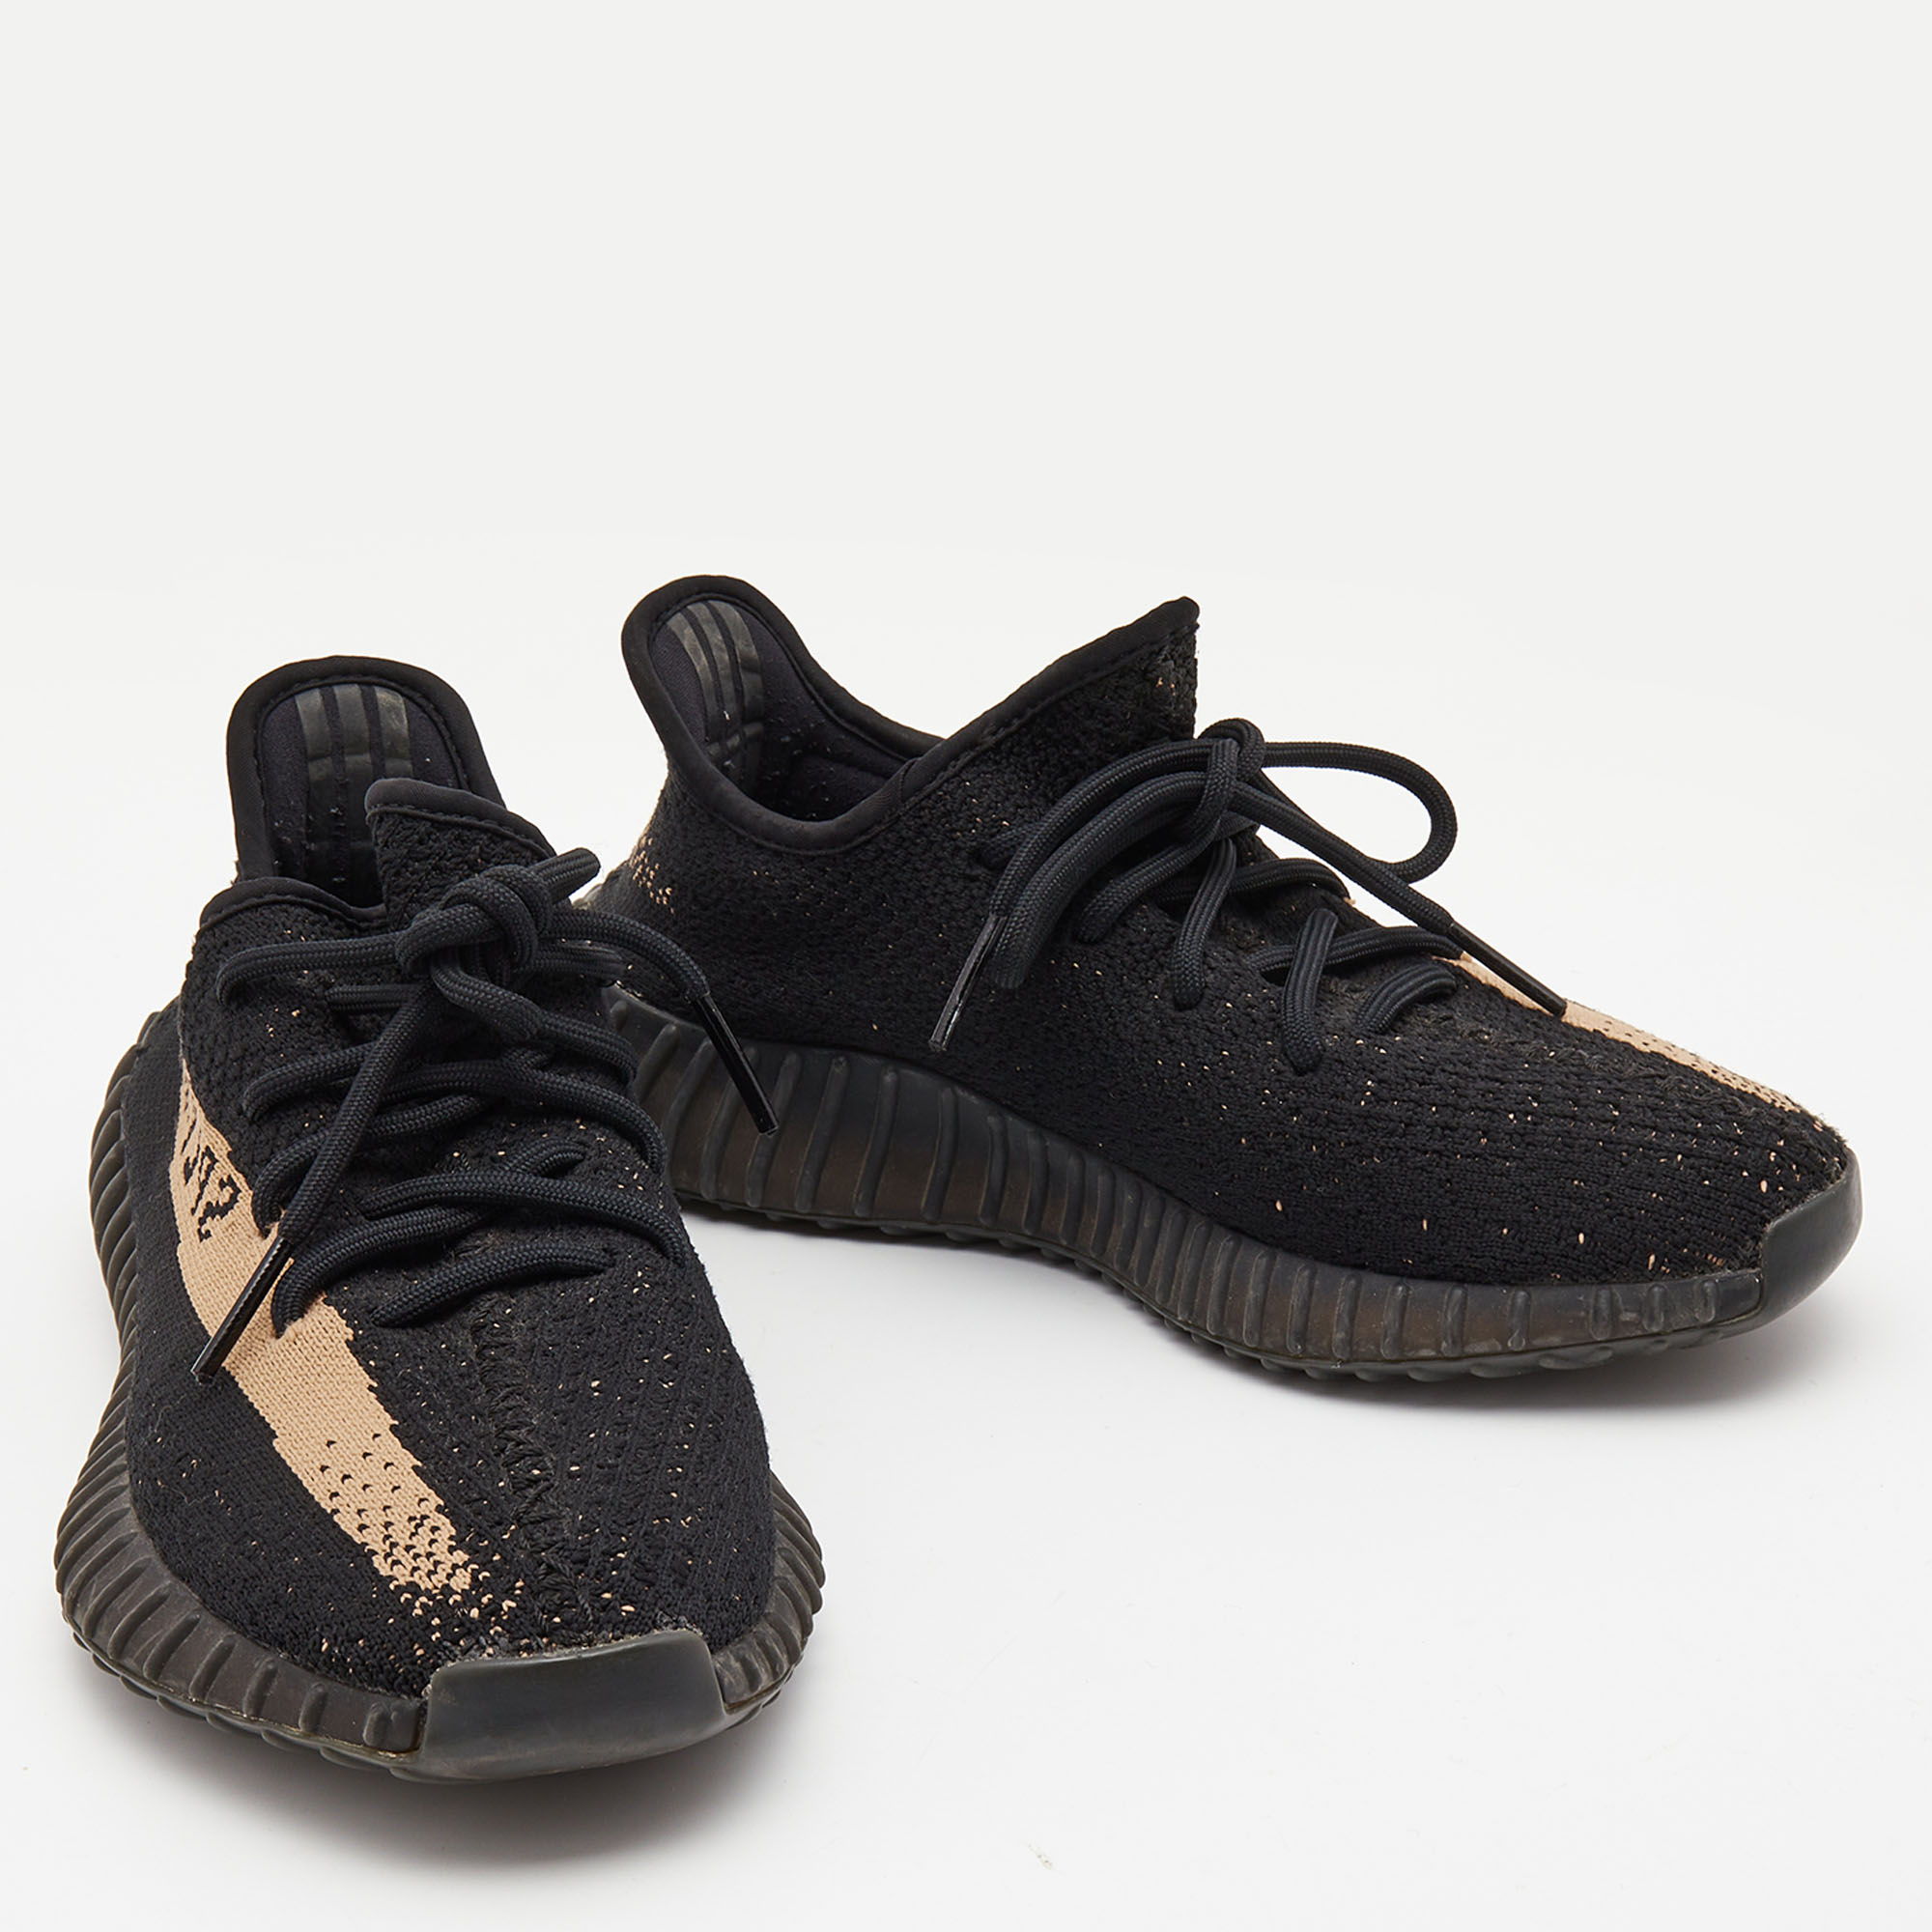 Yeezy X Adidas Black/Brown Knit Fabric Boost 350 V2 Copper Sneakers Size 39 1/3